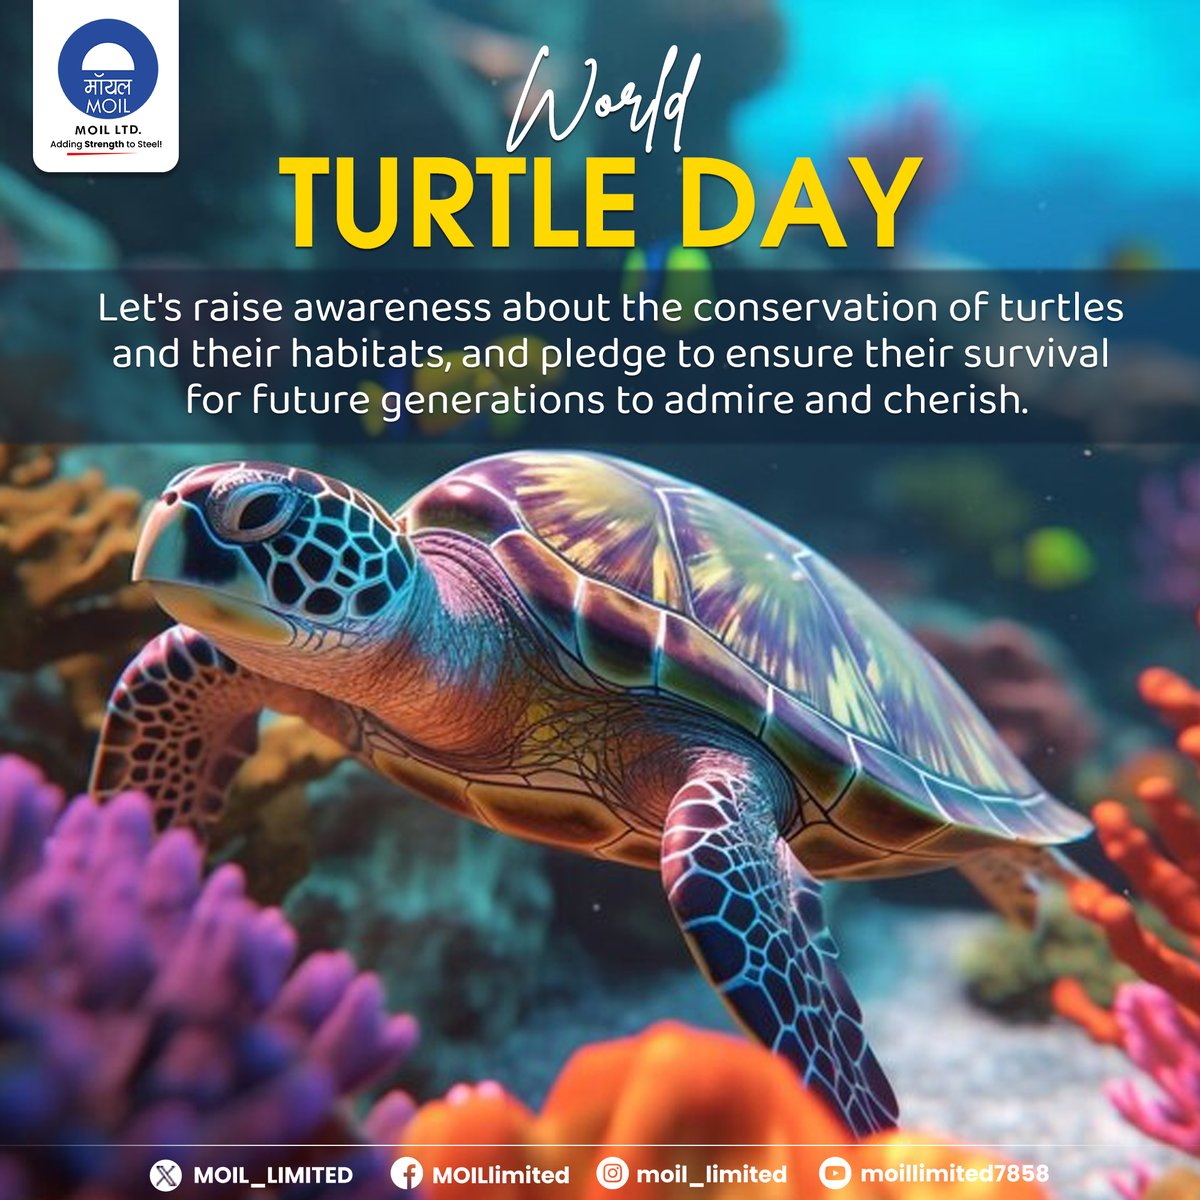 Celebrating our underwater guardians on World Turtle Day! Let's come together to ensure the survival and thriving of these majestic creatures and their aquatic homes. #WorldTurtleDay #SaveTheTurtles #MOIL #HarEkKaamDeshKeNaam